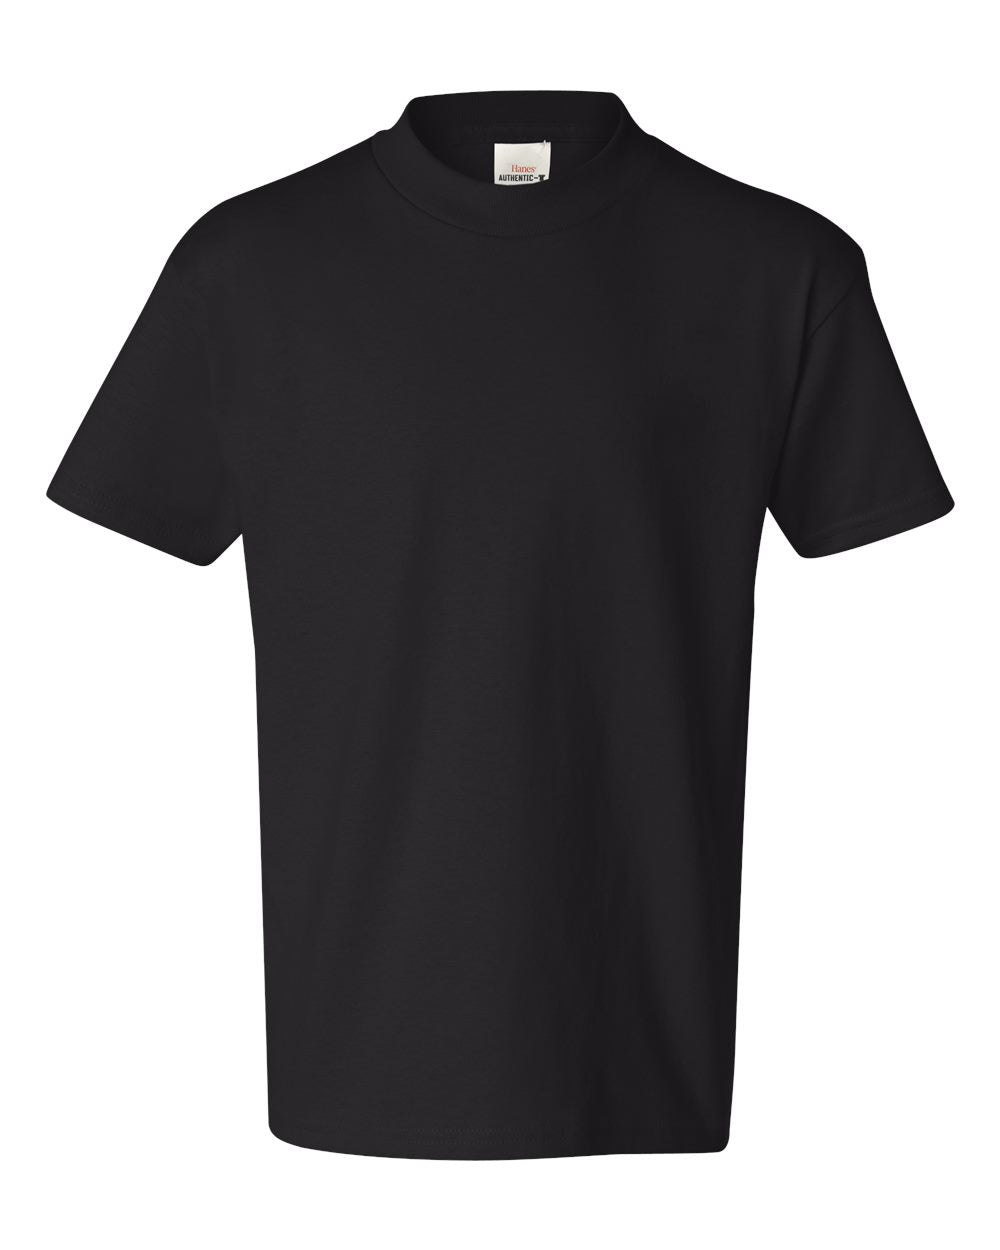 HEAVYWEIGHT Hanes - Authentic Youth T-Shirt - 5450